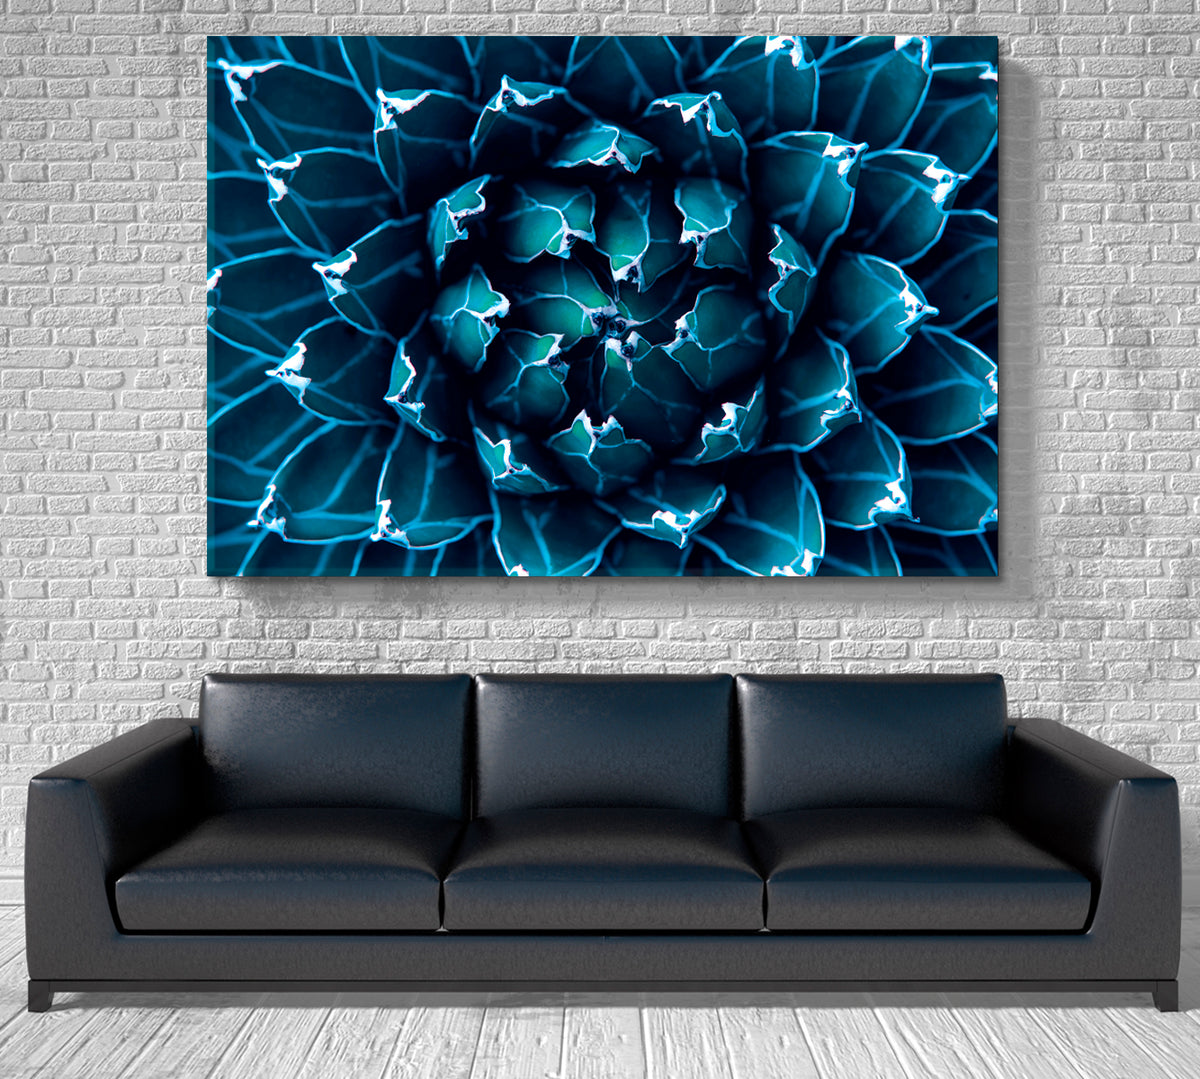 Agave Cactus Abstract Natural Tropical Pattern Floral & Botanical Split Art Artesty 1 panel 24" x 16" 